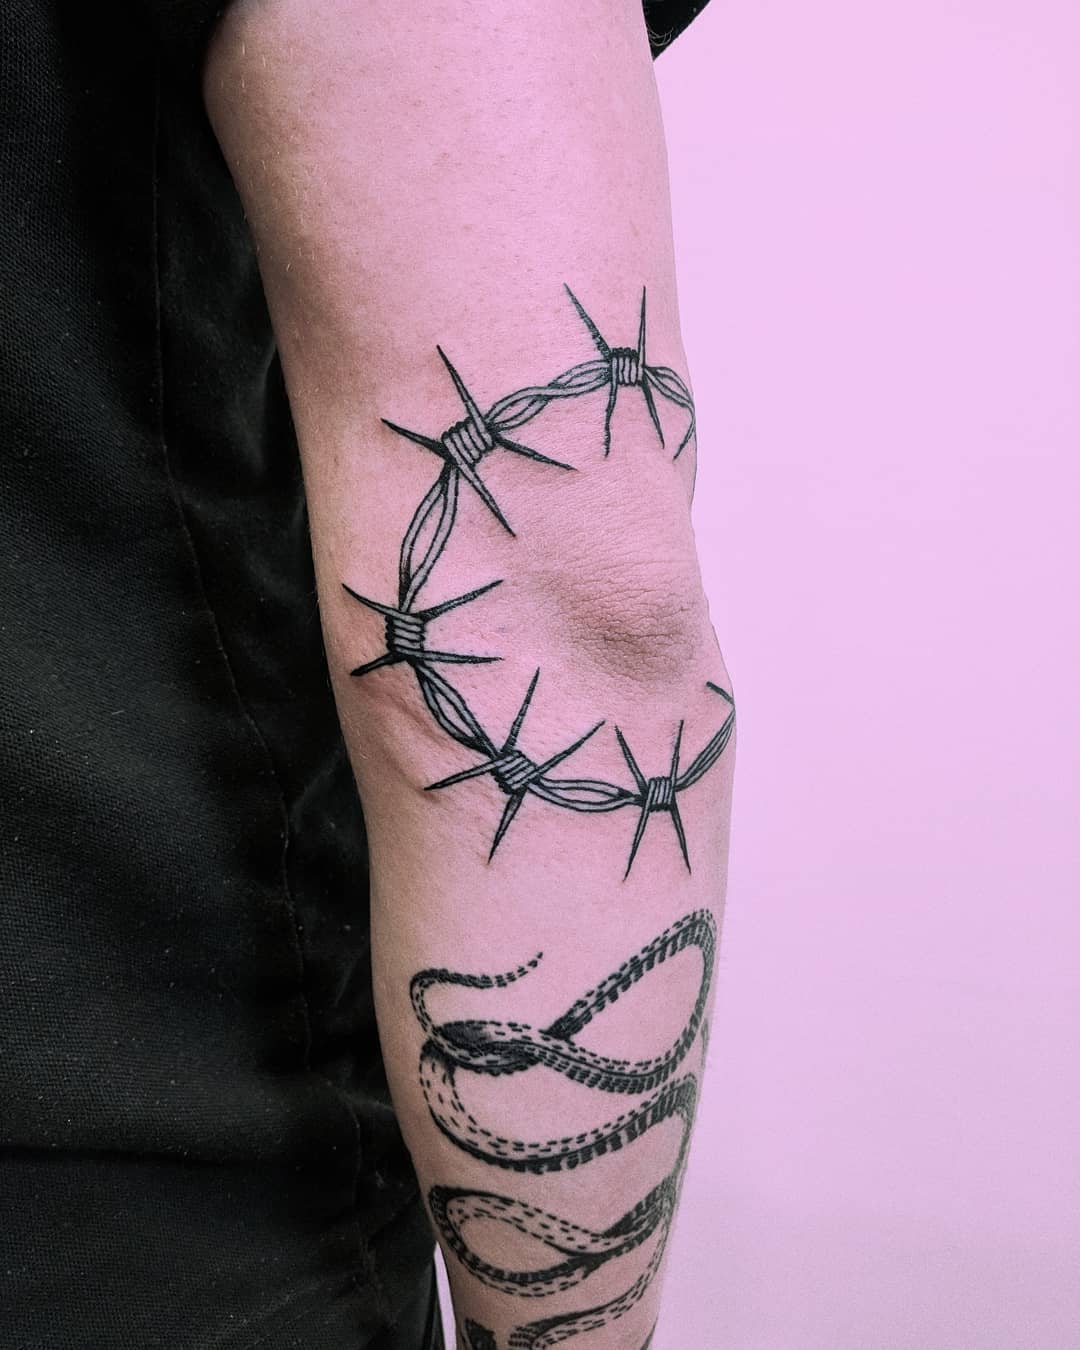 Barbed wire circle by Tristan Ritter